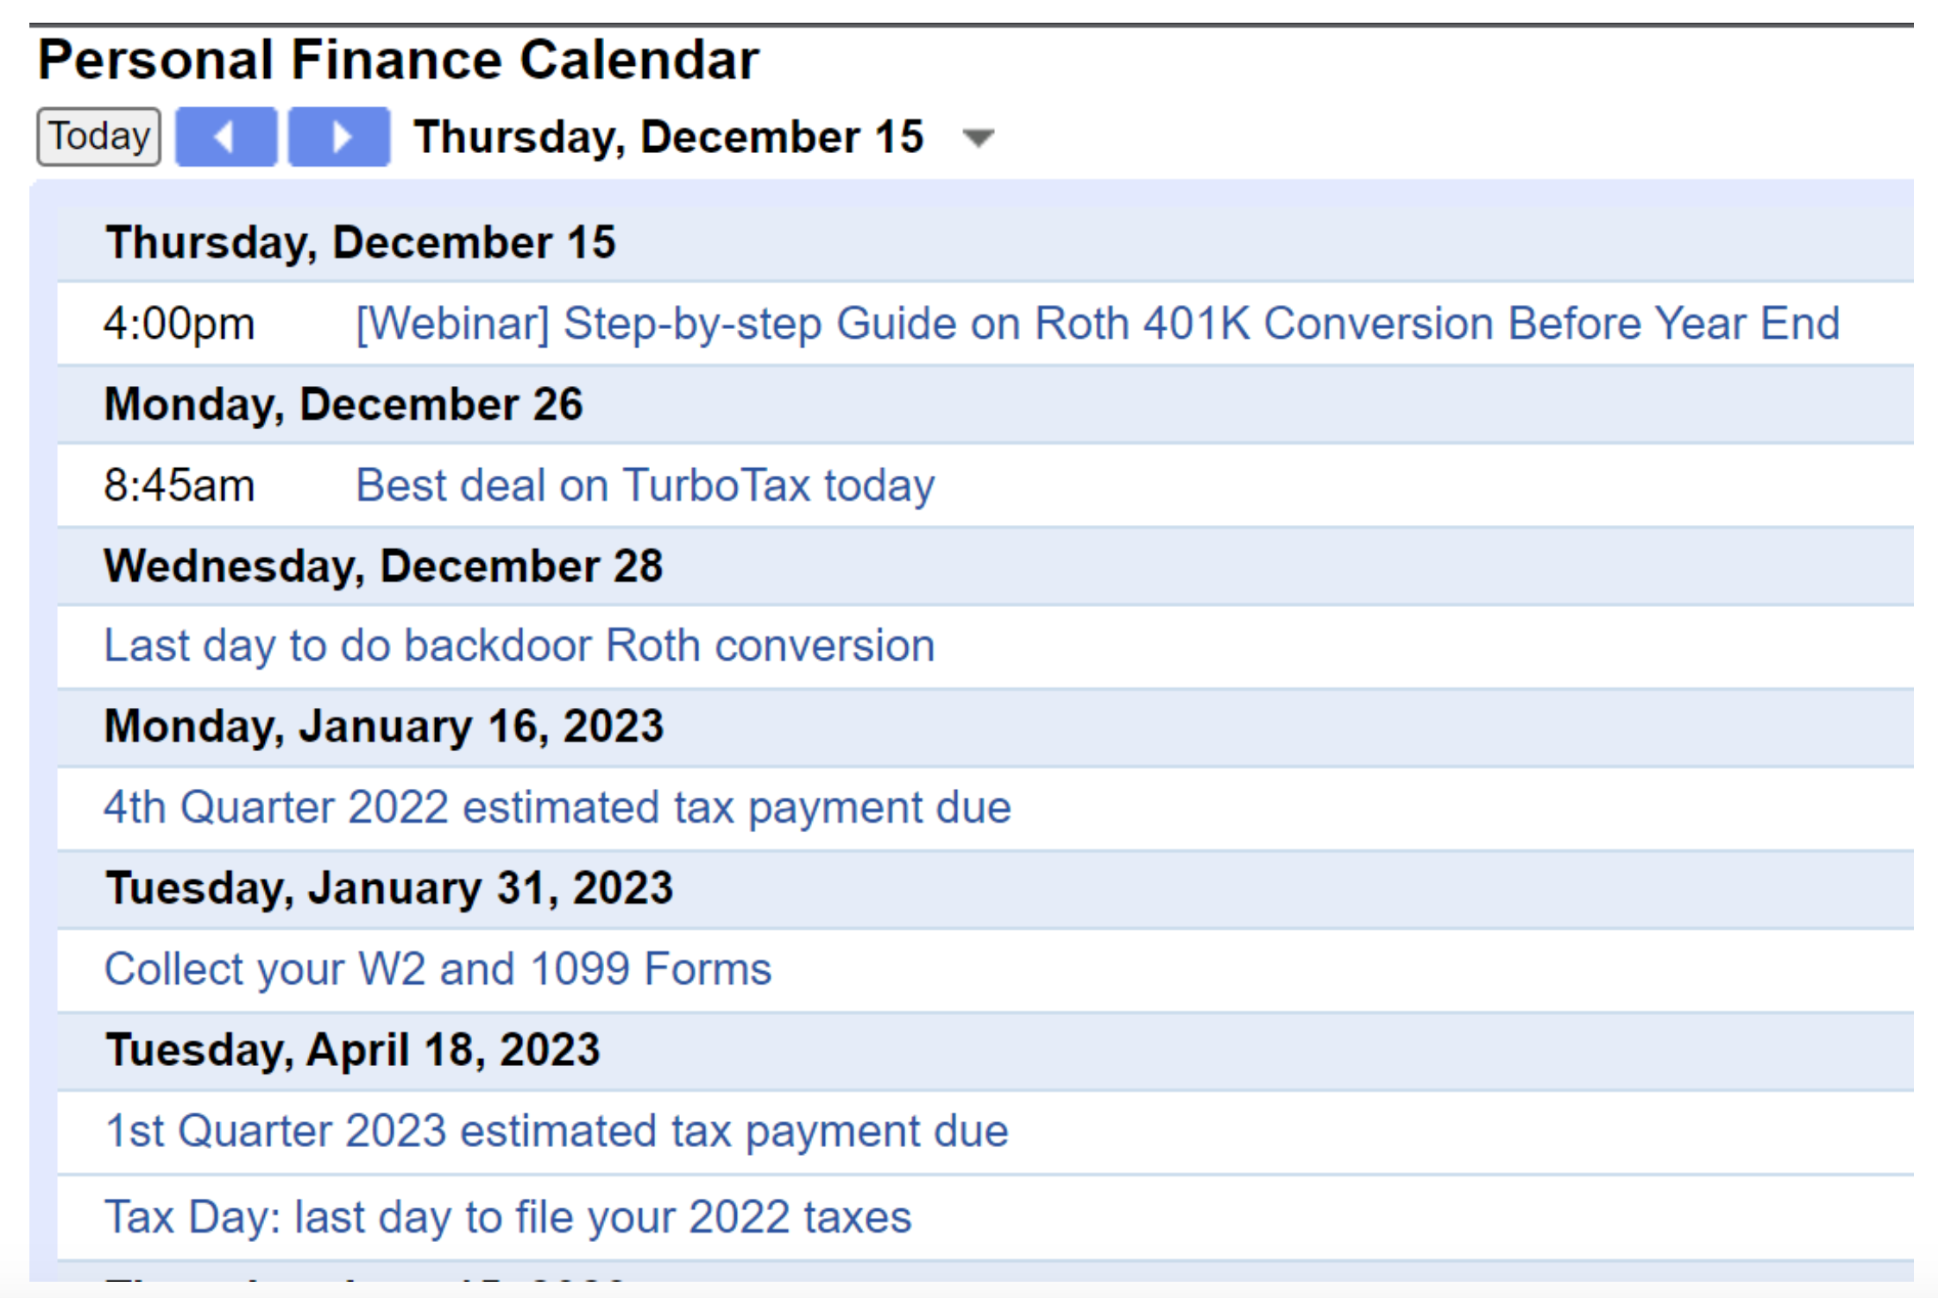 The Personal Finance Calendar prompts you with different finance and tax events around the year.